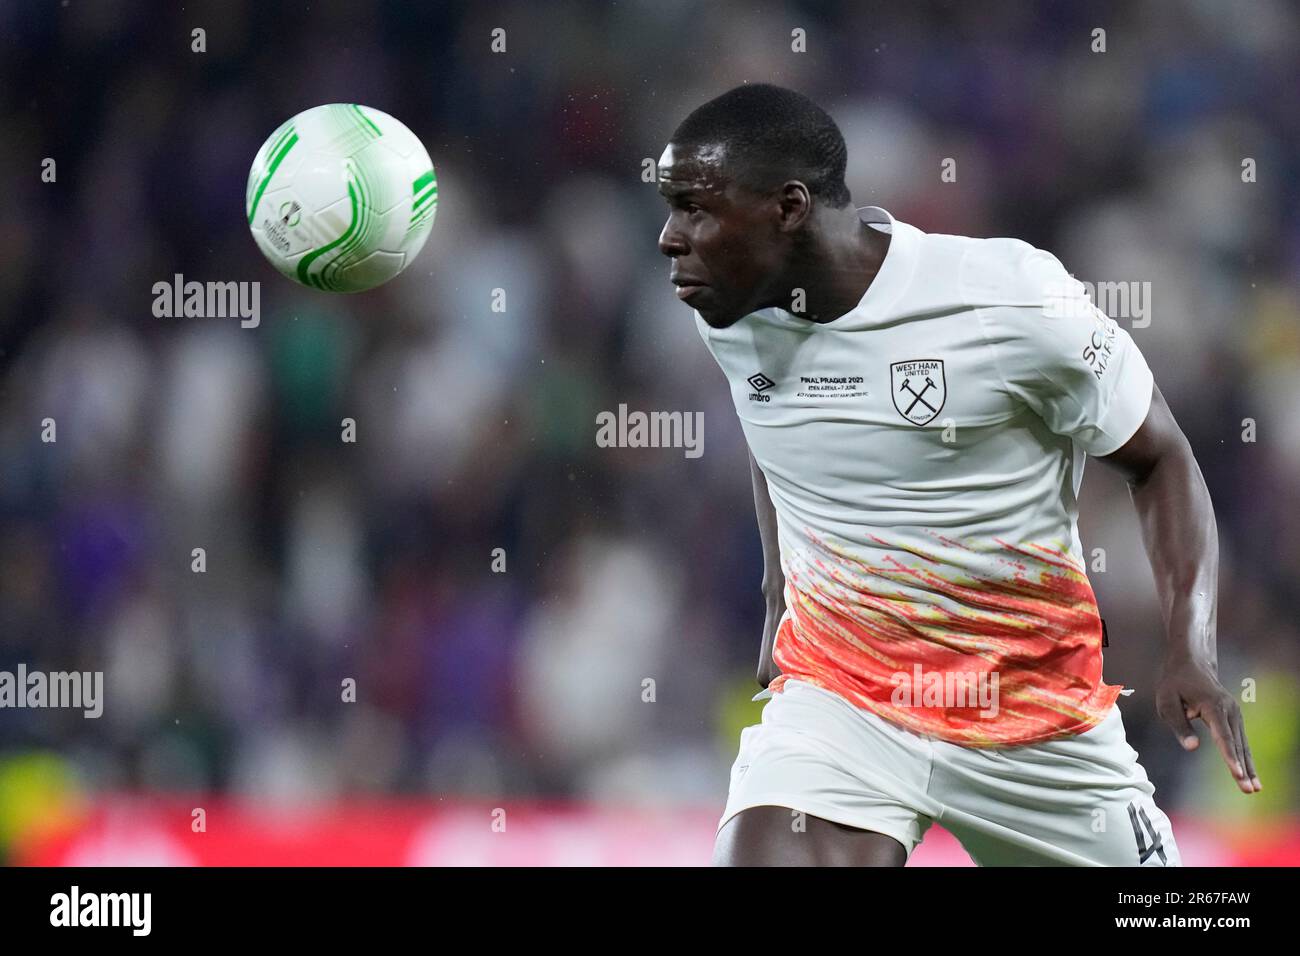 West Ham's Kurt Zouma heads the ball during the Europa Conference